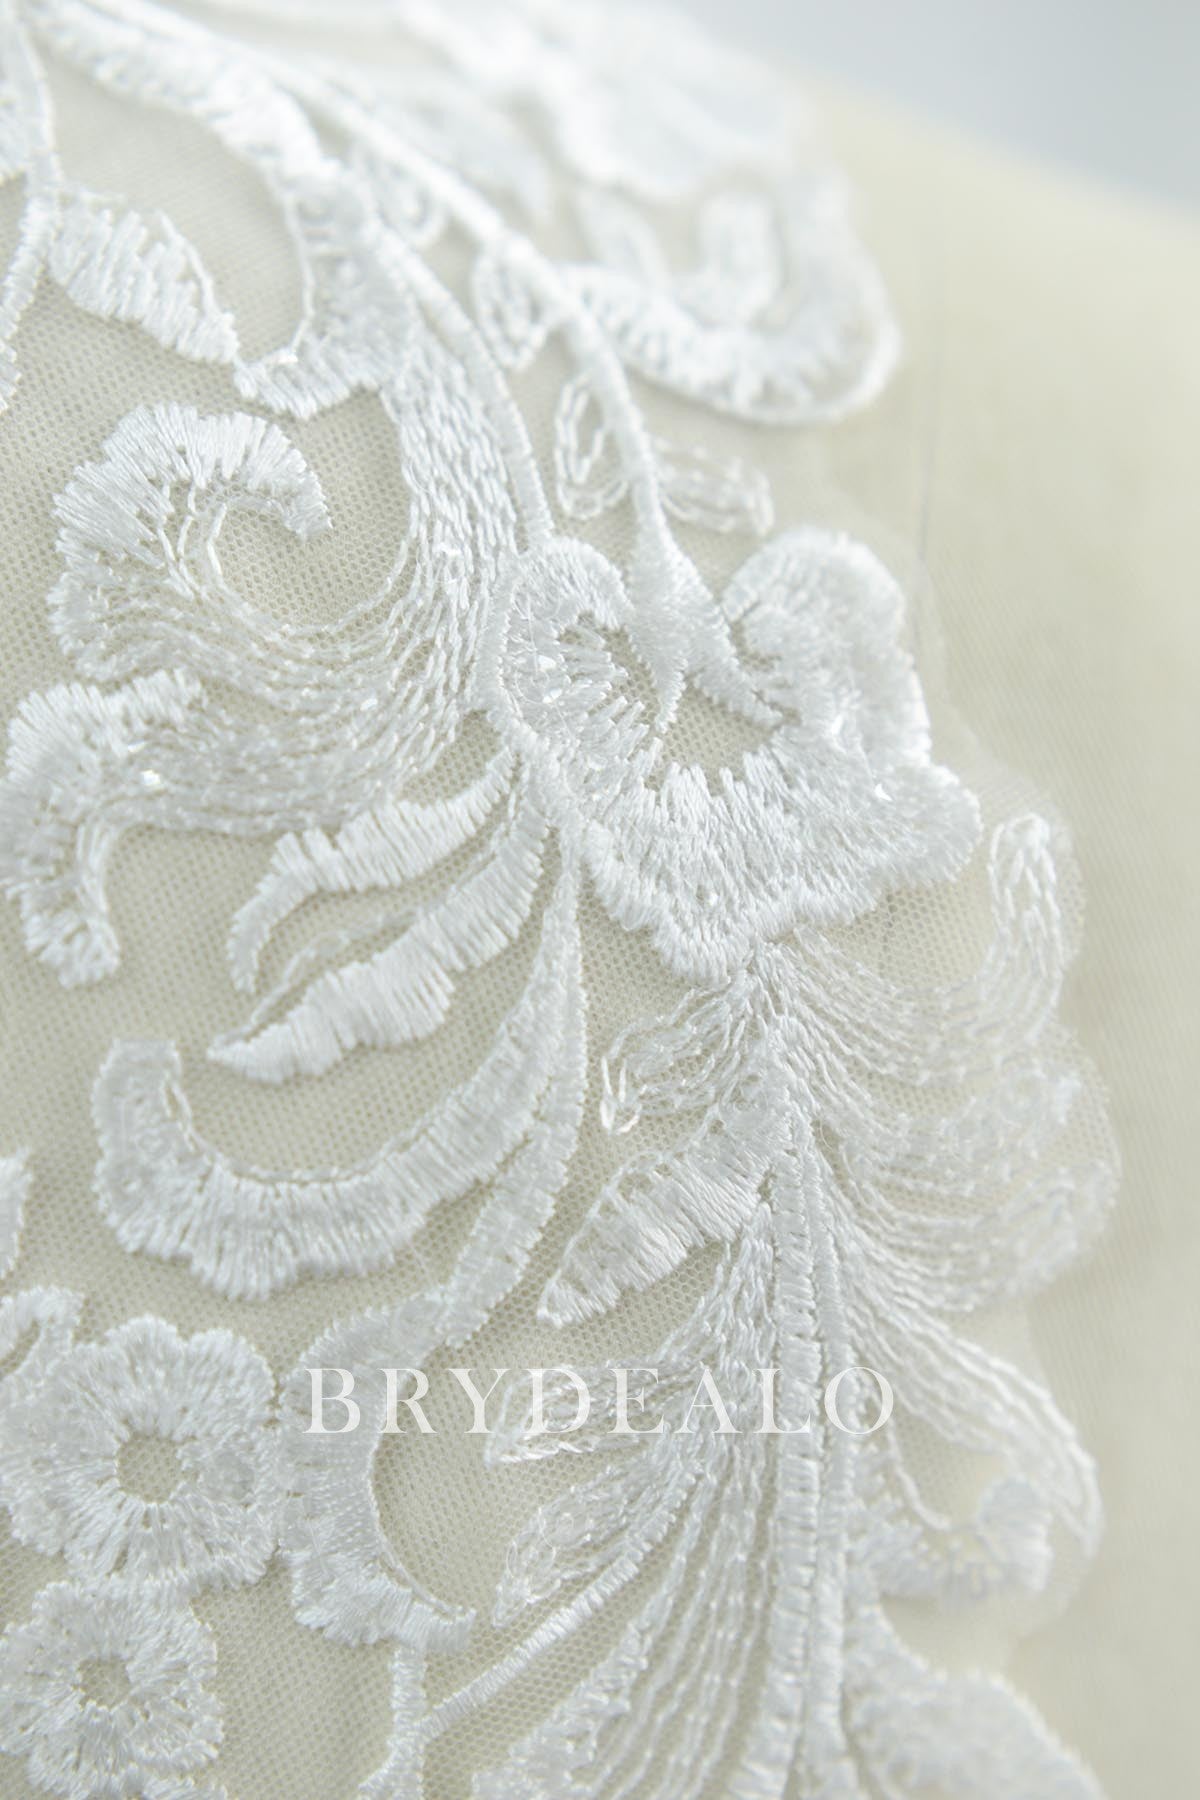 Wholesale Shimmery Flower Embroidery Bridal Lace Appliques